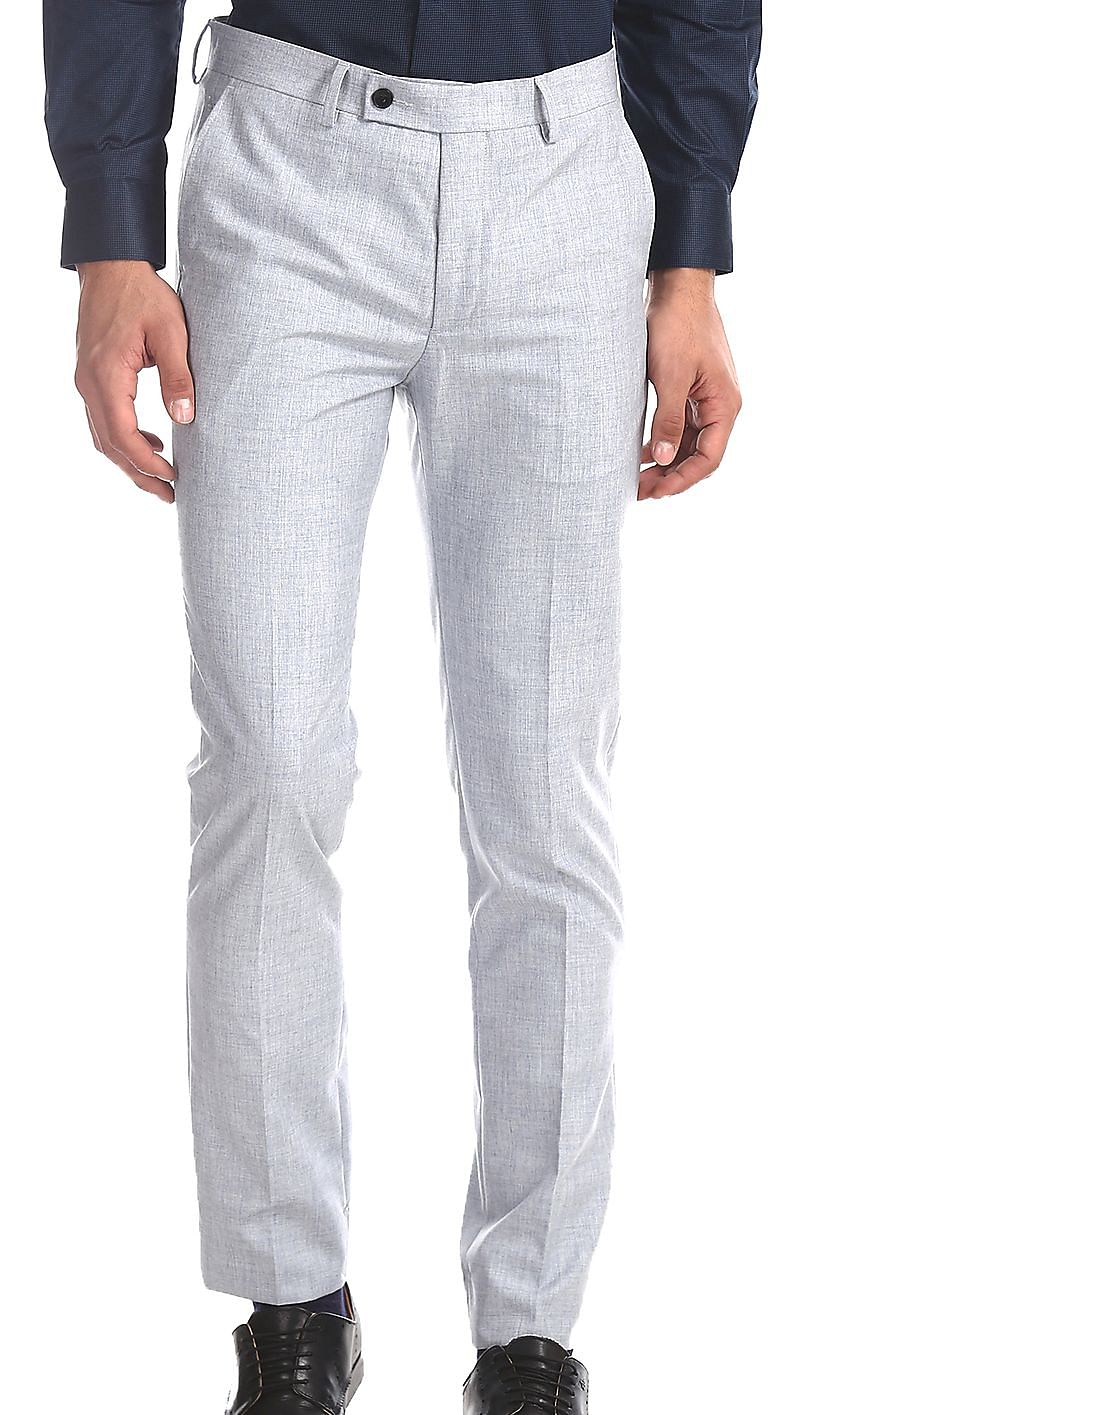 Buy Men Grey Slim Fit Patterned Trousers online at NNNOW.com